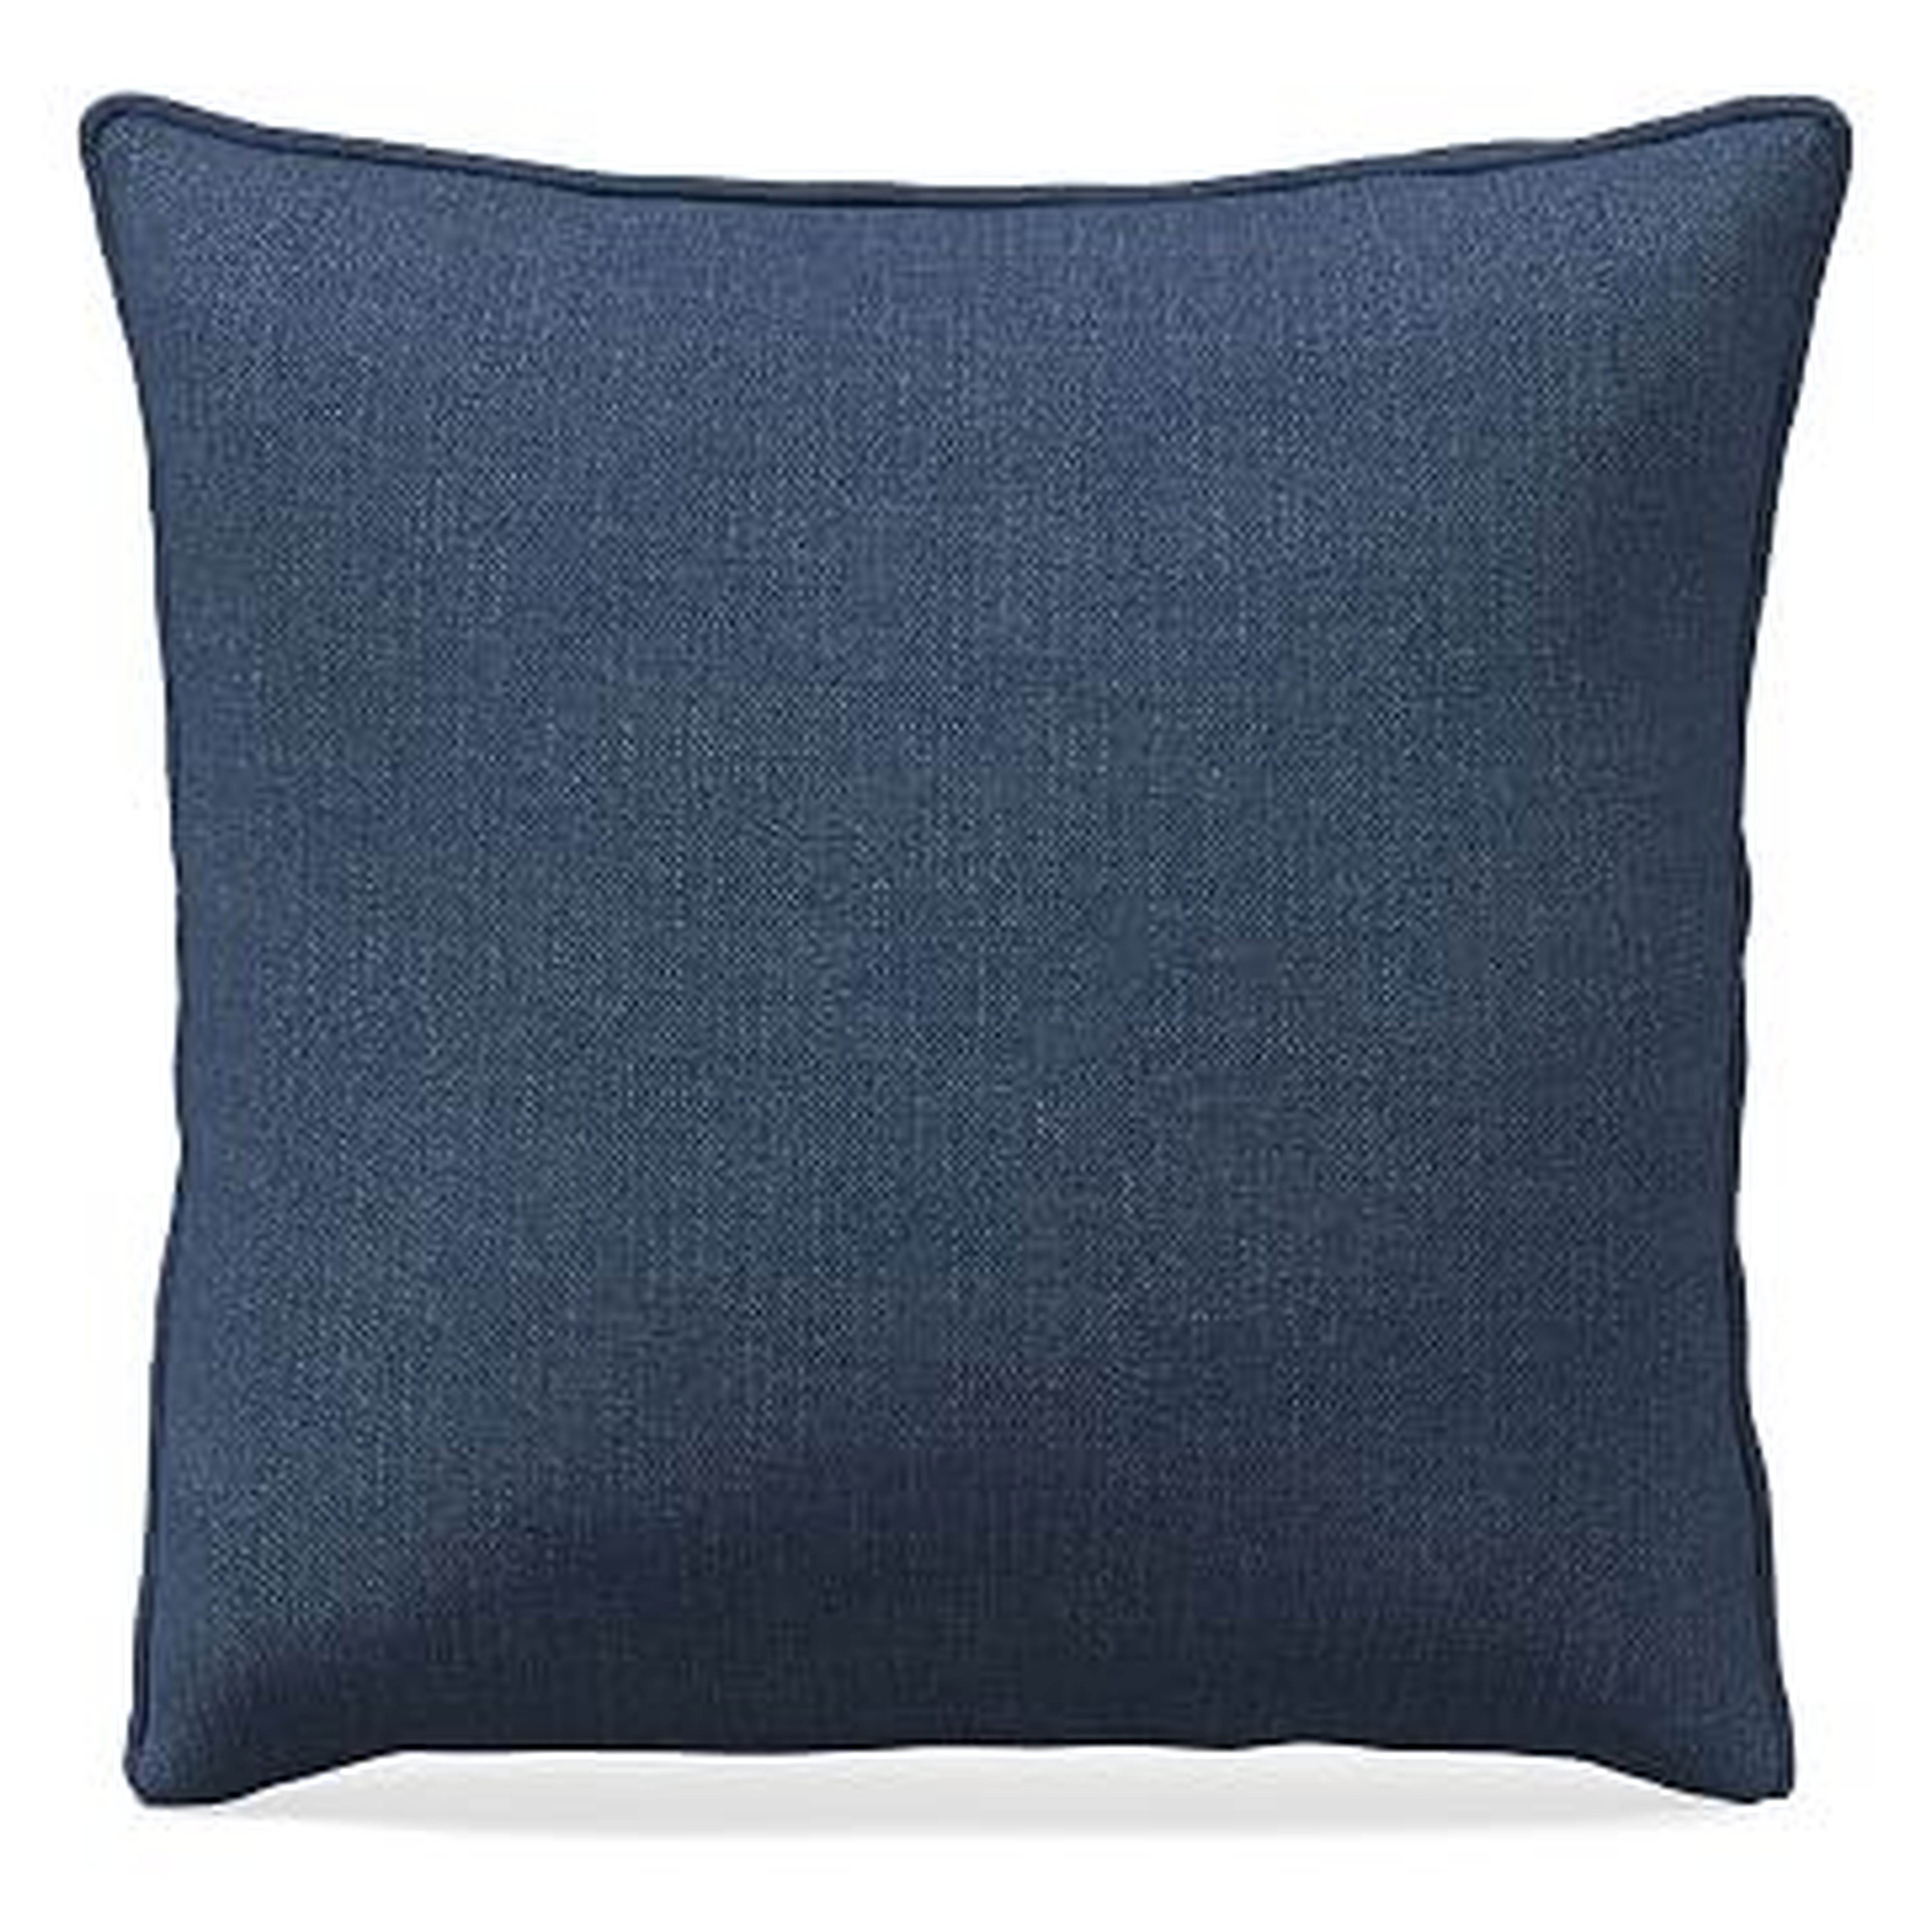 26"x 26" Welt Seam Pillow, Performance Yarn Dyed Linen Weave, French Blue - West Elm